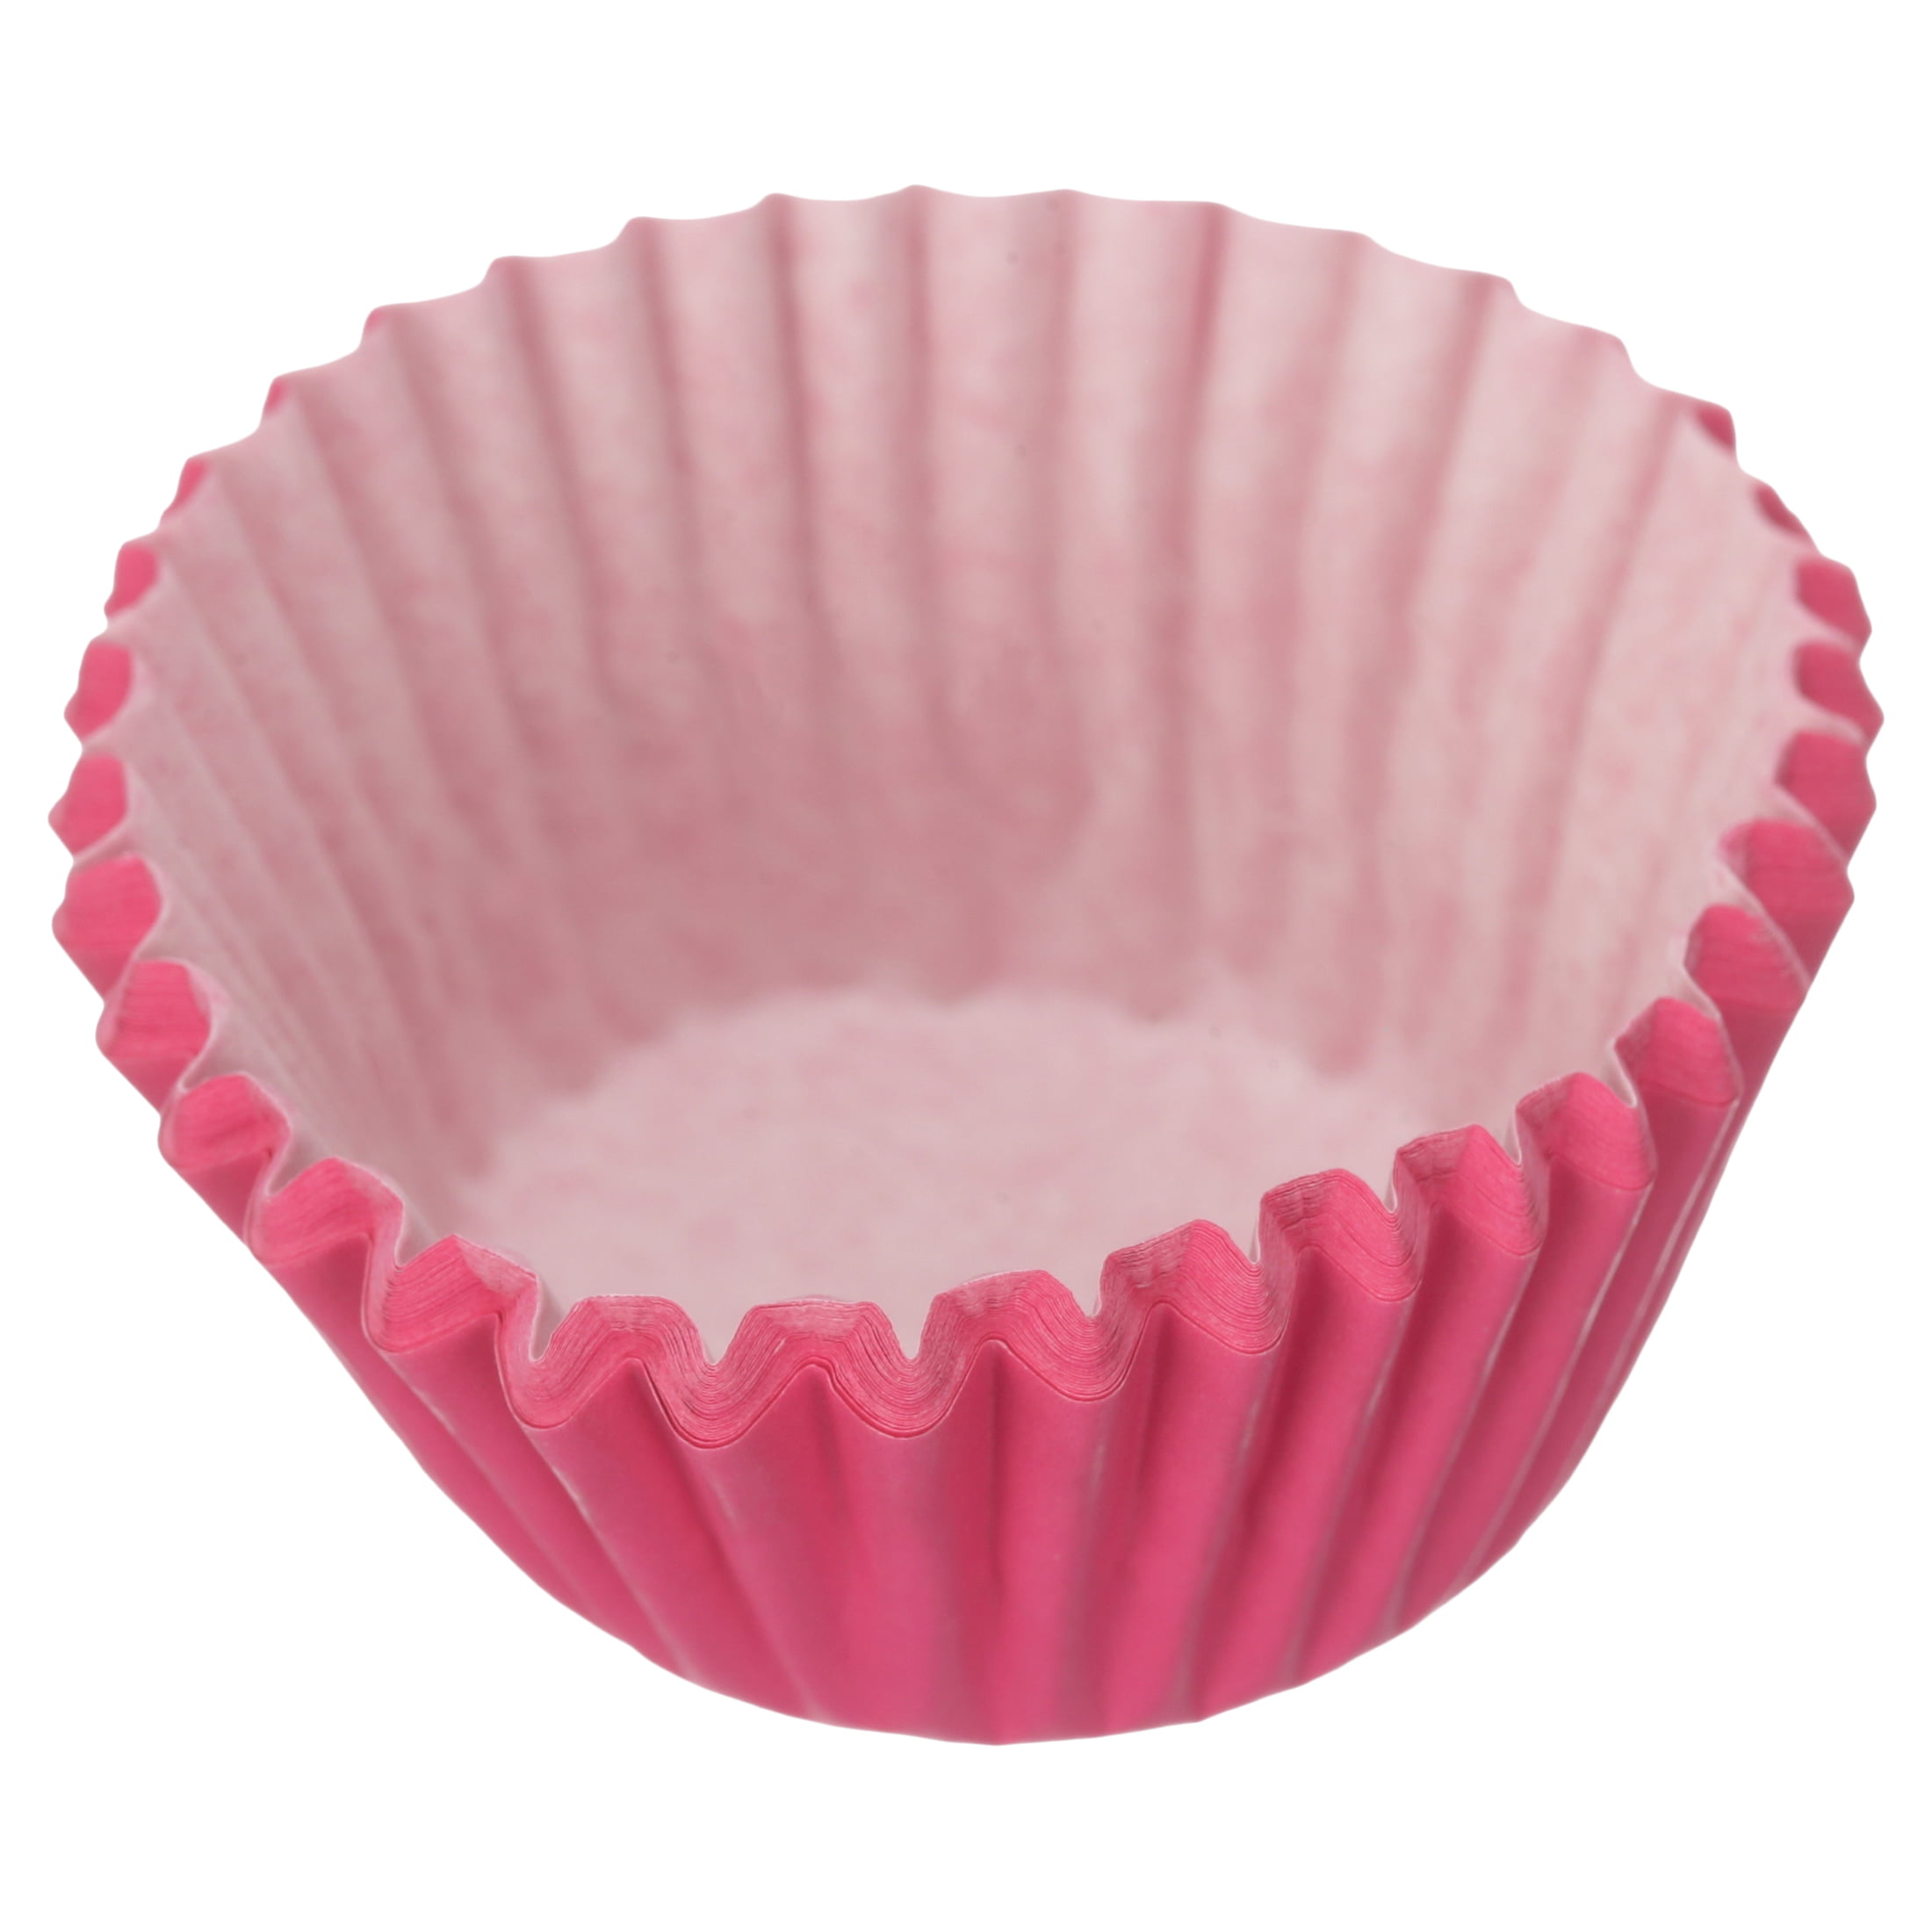 DecoPac Sachet Pink Scalloped Baking Cups, Pack of 50, Perfect For  Delicious Cupcakes, Delicate Scalloped Edge, 50 Oven Safe Cupcake Cases,50